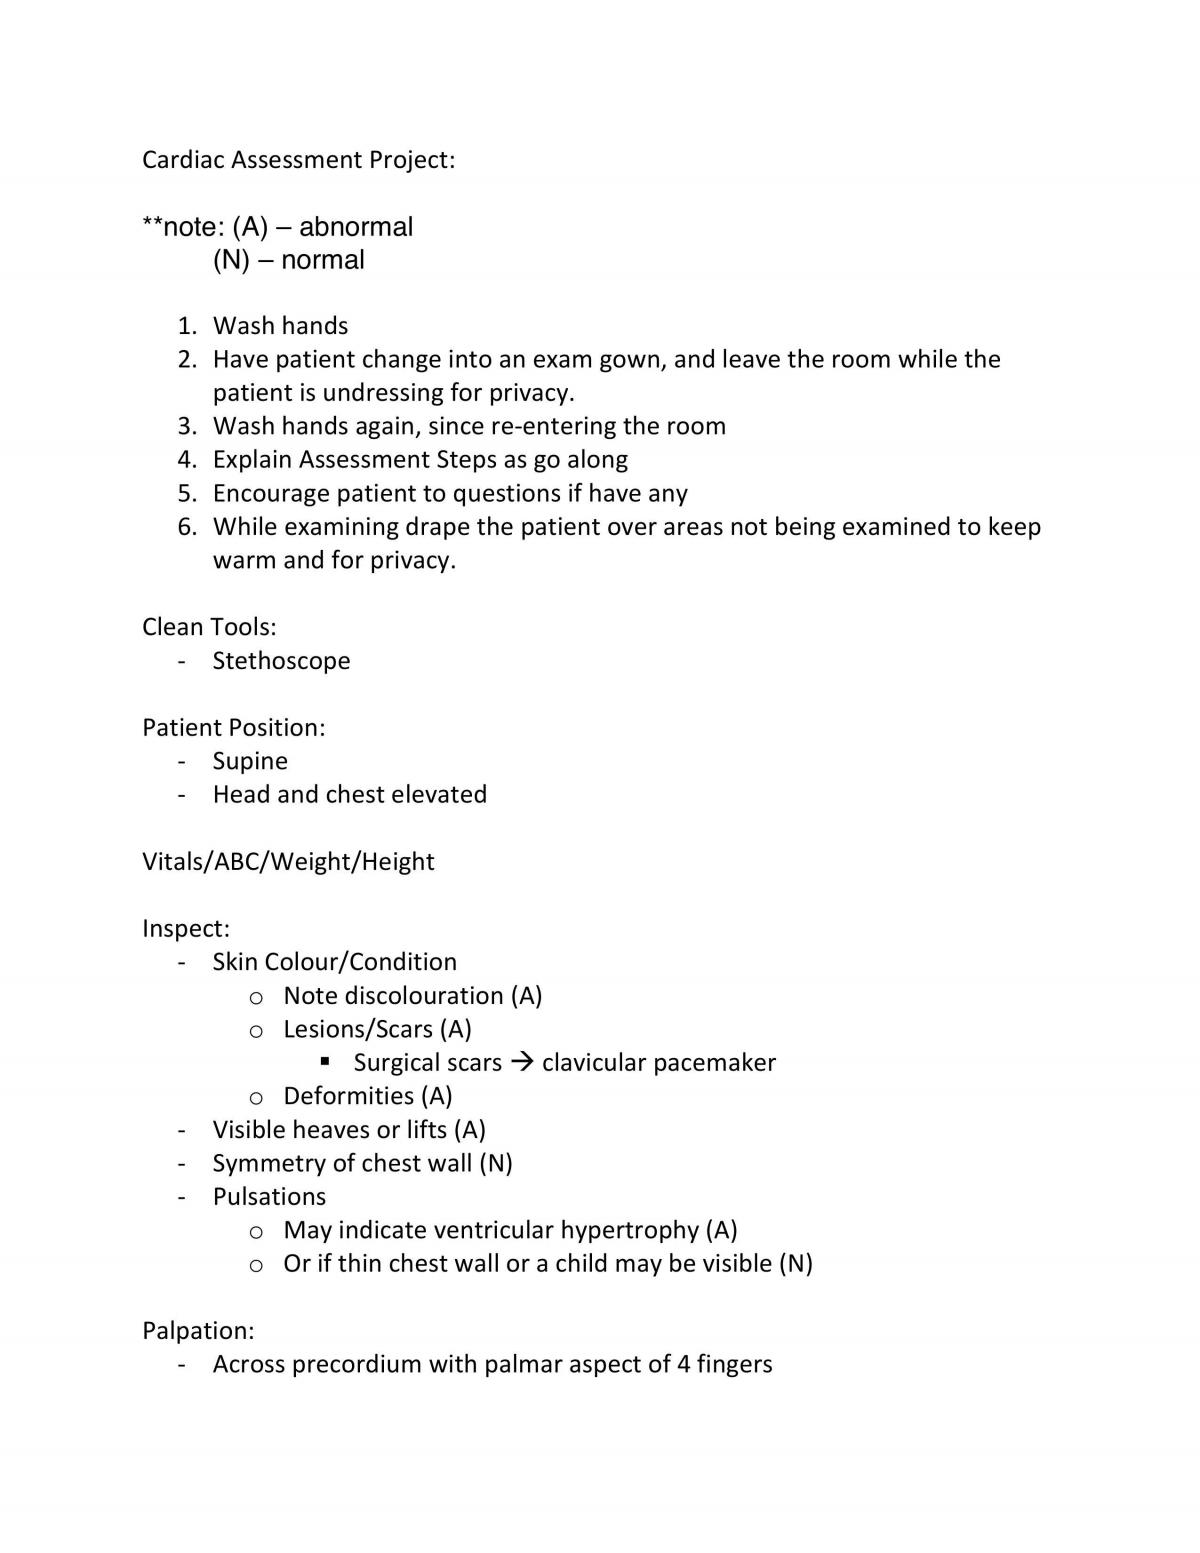 Cardiac Assessment Project - Page 1